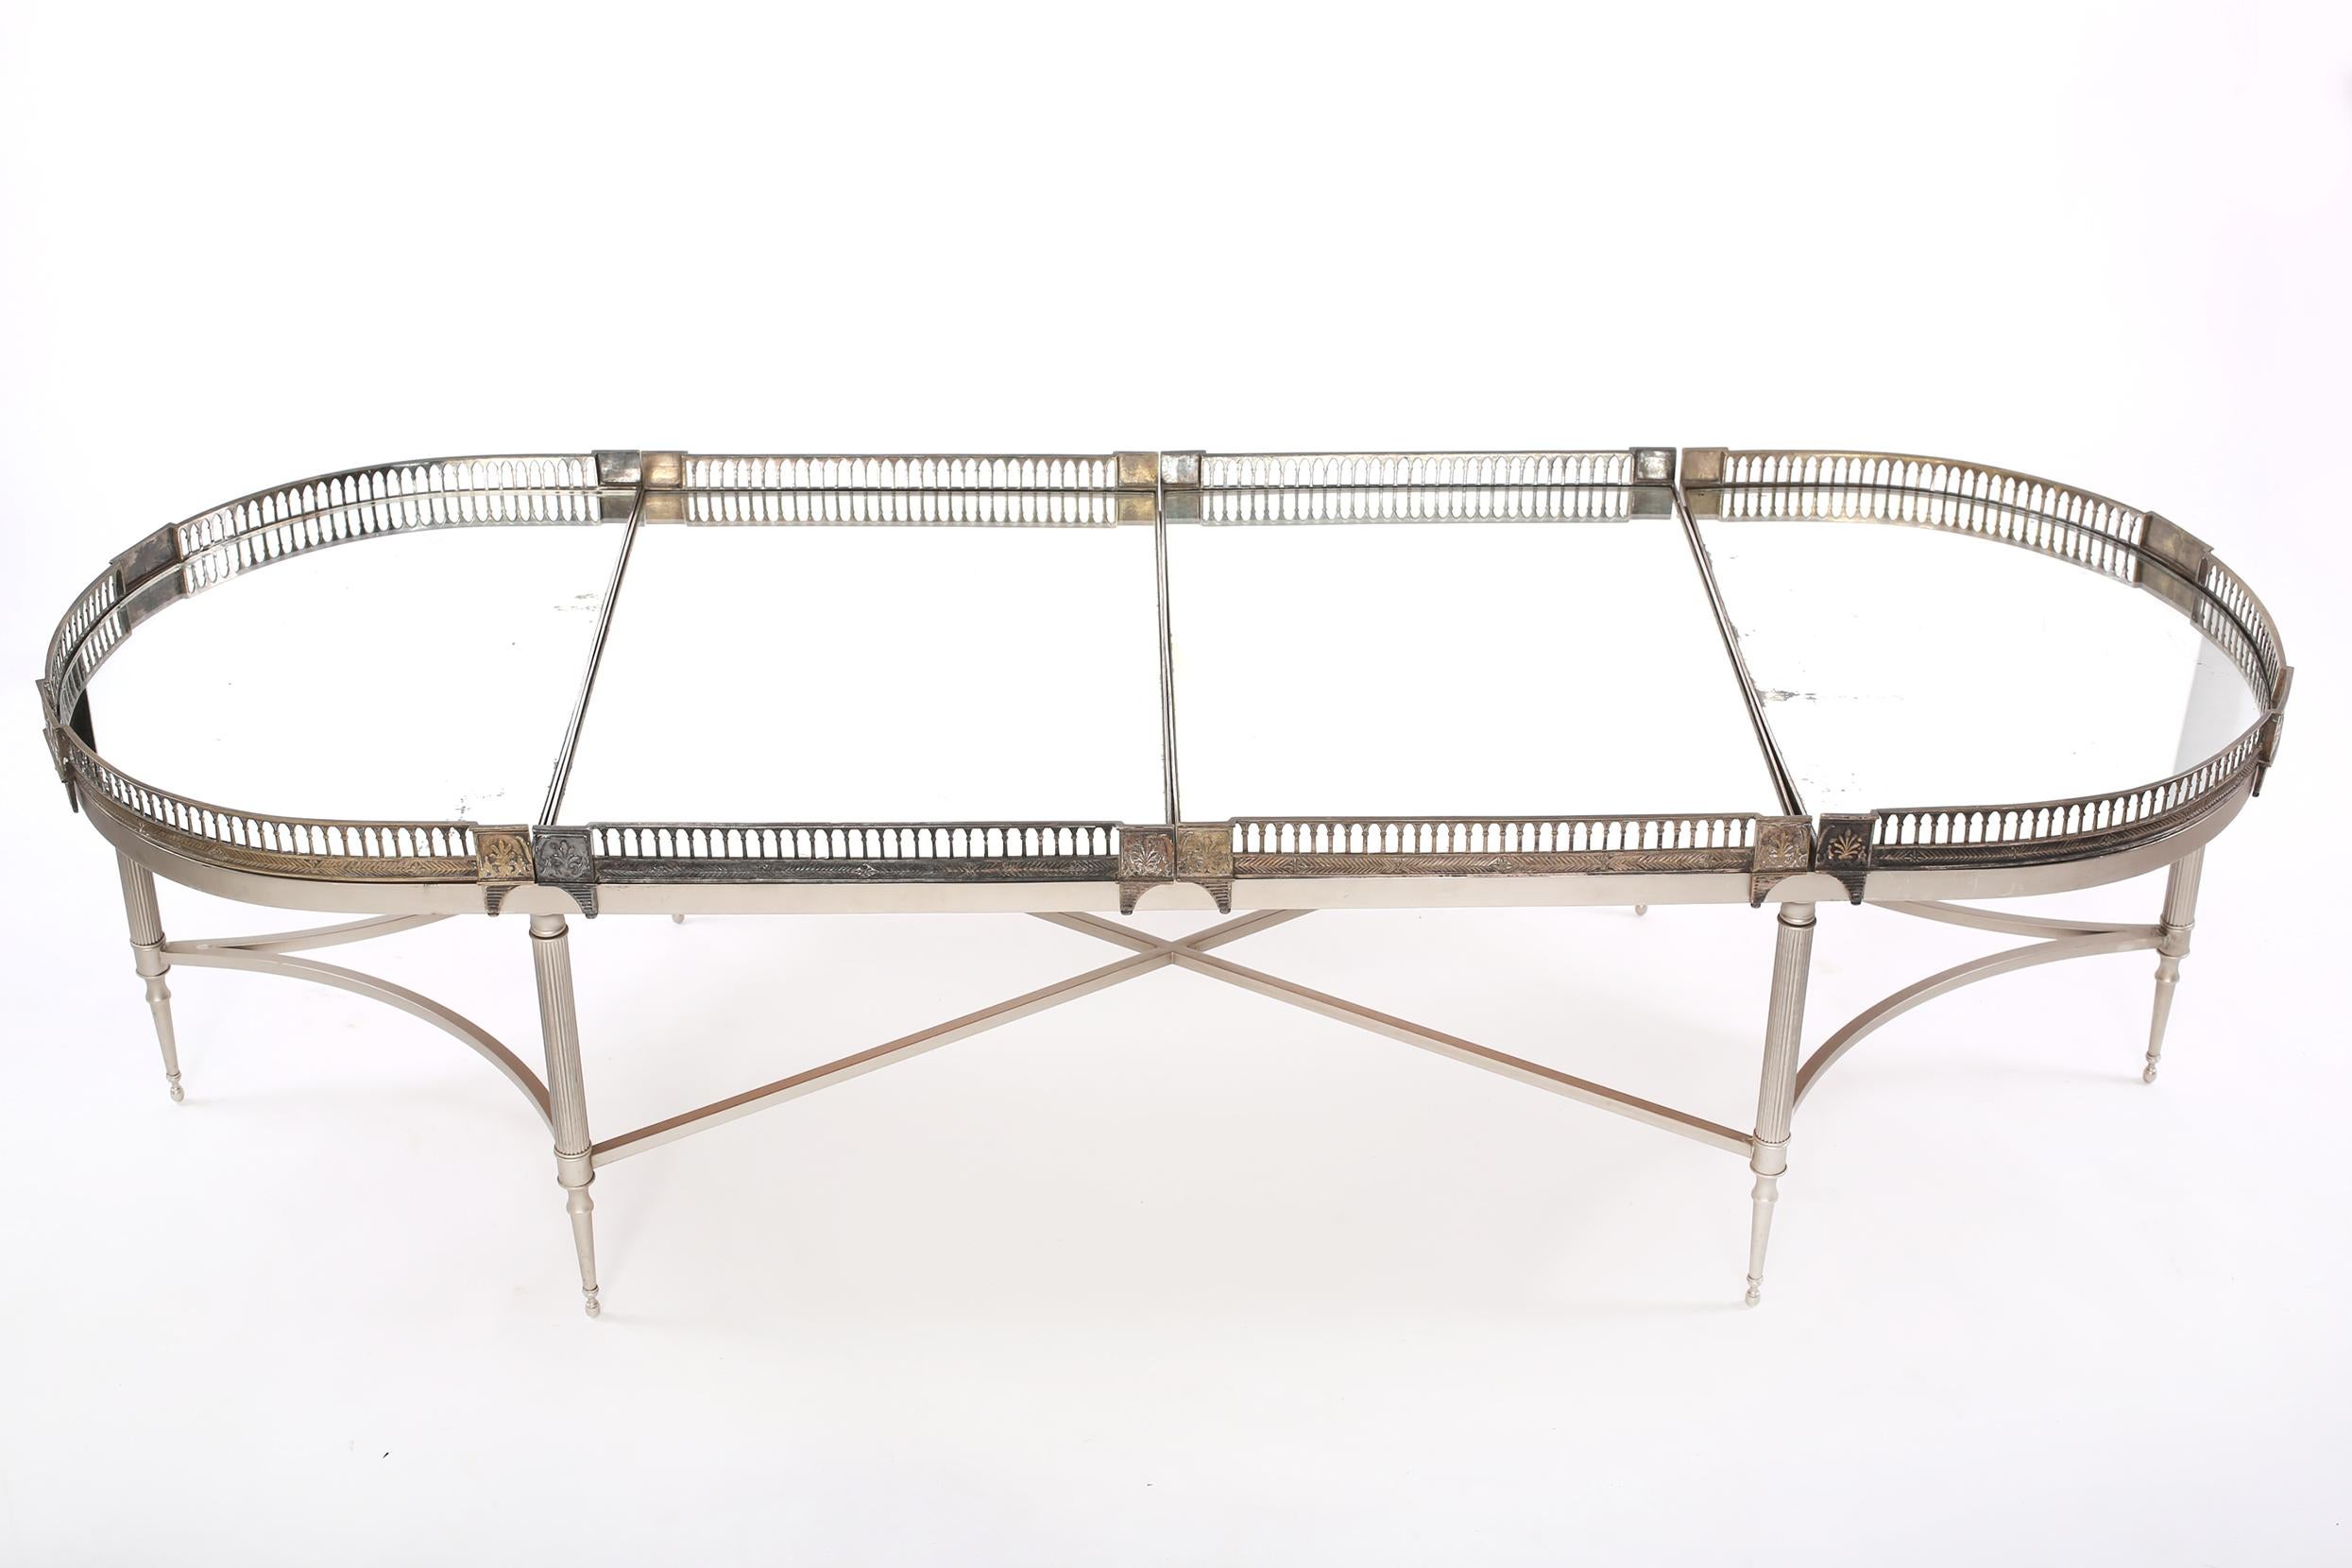 Early 20th century silver plate framed four mirrored piece sur tout de table gallery top cocktail / coffee table with exterior design detail. The cocktail table is in good condition with age / use appropriate wear. The cocktail table stand about 67